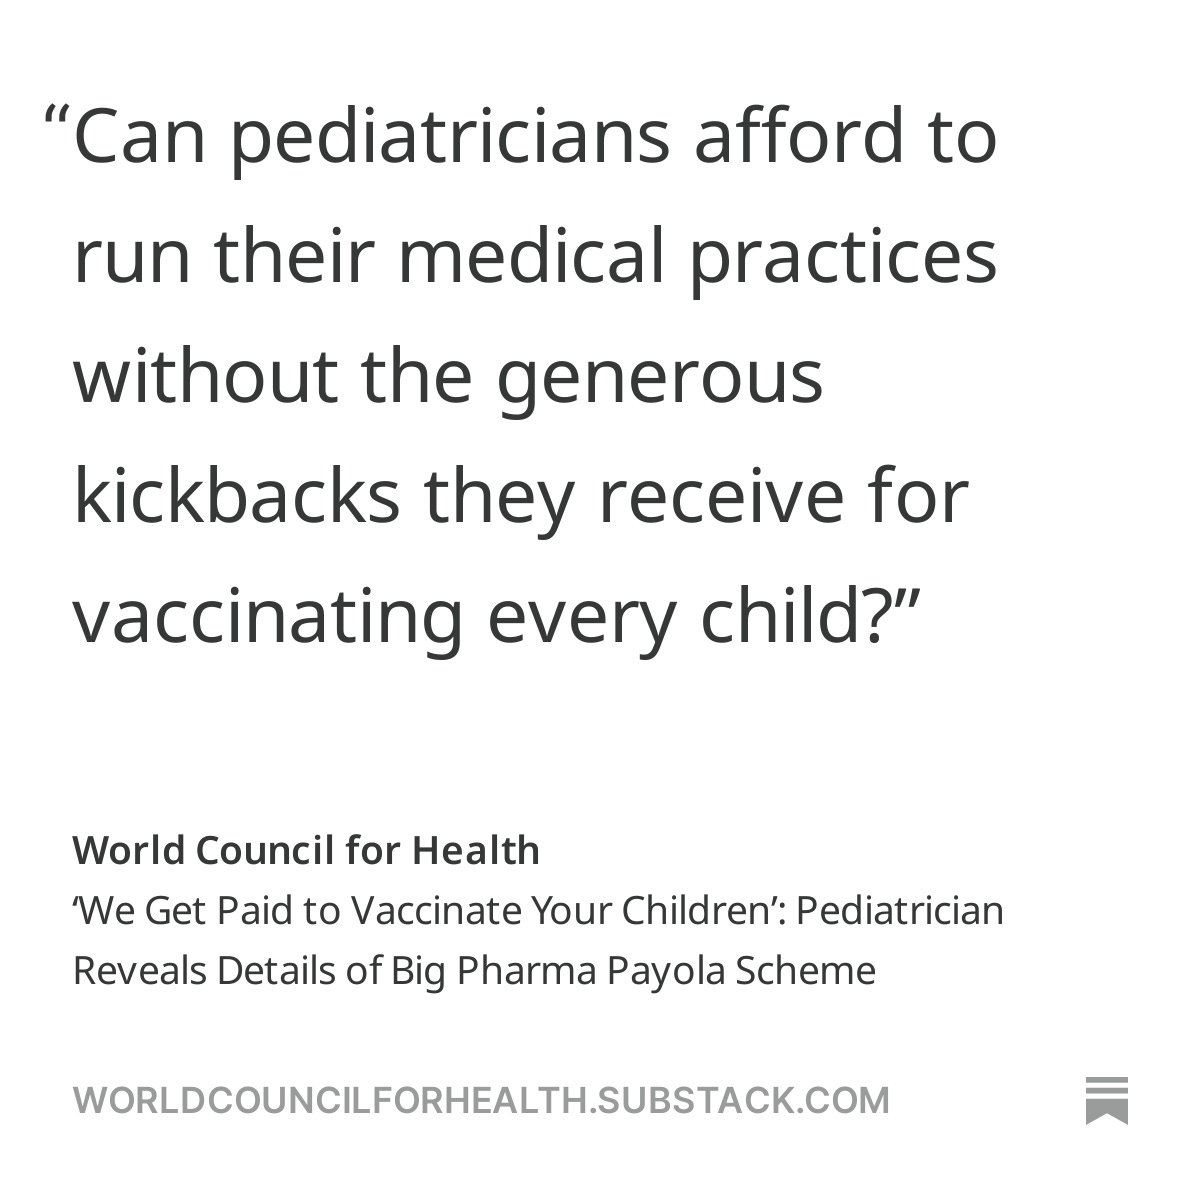 In an interview on Children's Health Defense’s “Vax-Unvax” bus, Dr. Paul Thomas exposed the financial incentives pediatricians receive for administering vaccines, including kickbacks of up to $240 per visit. Read more and share on Substack: worldcouncilforhealth.substack.com/p/paid-to-vacc…